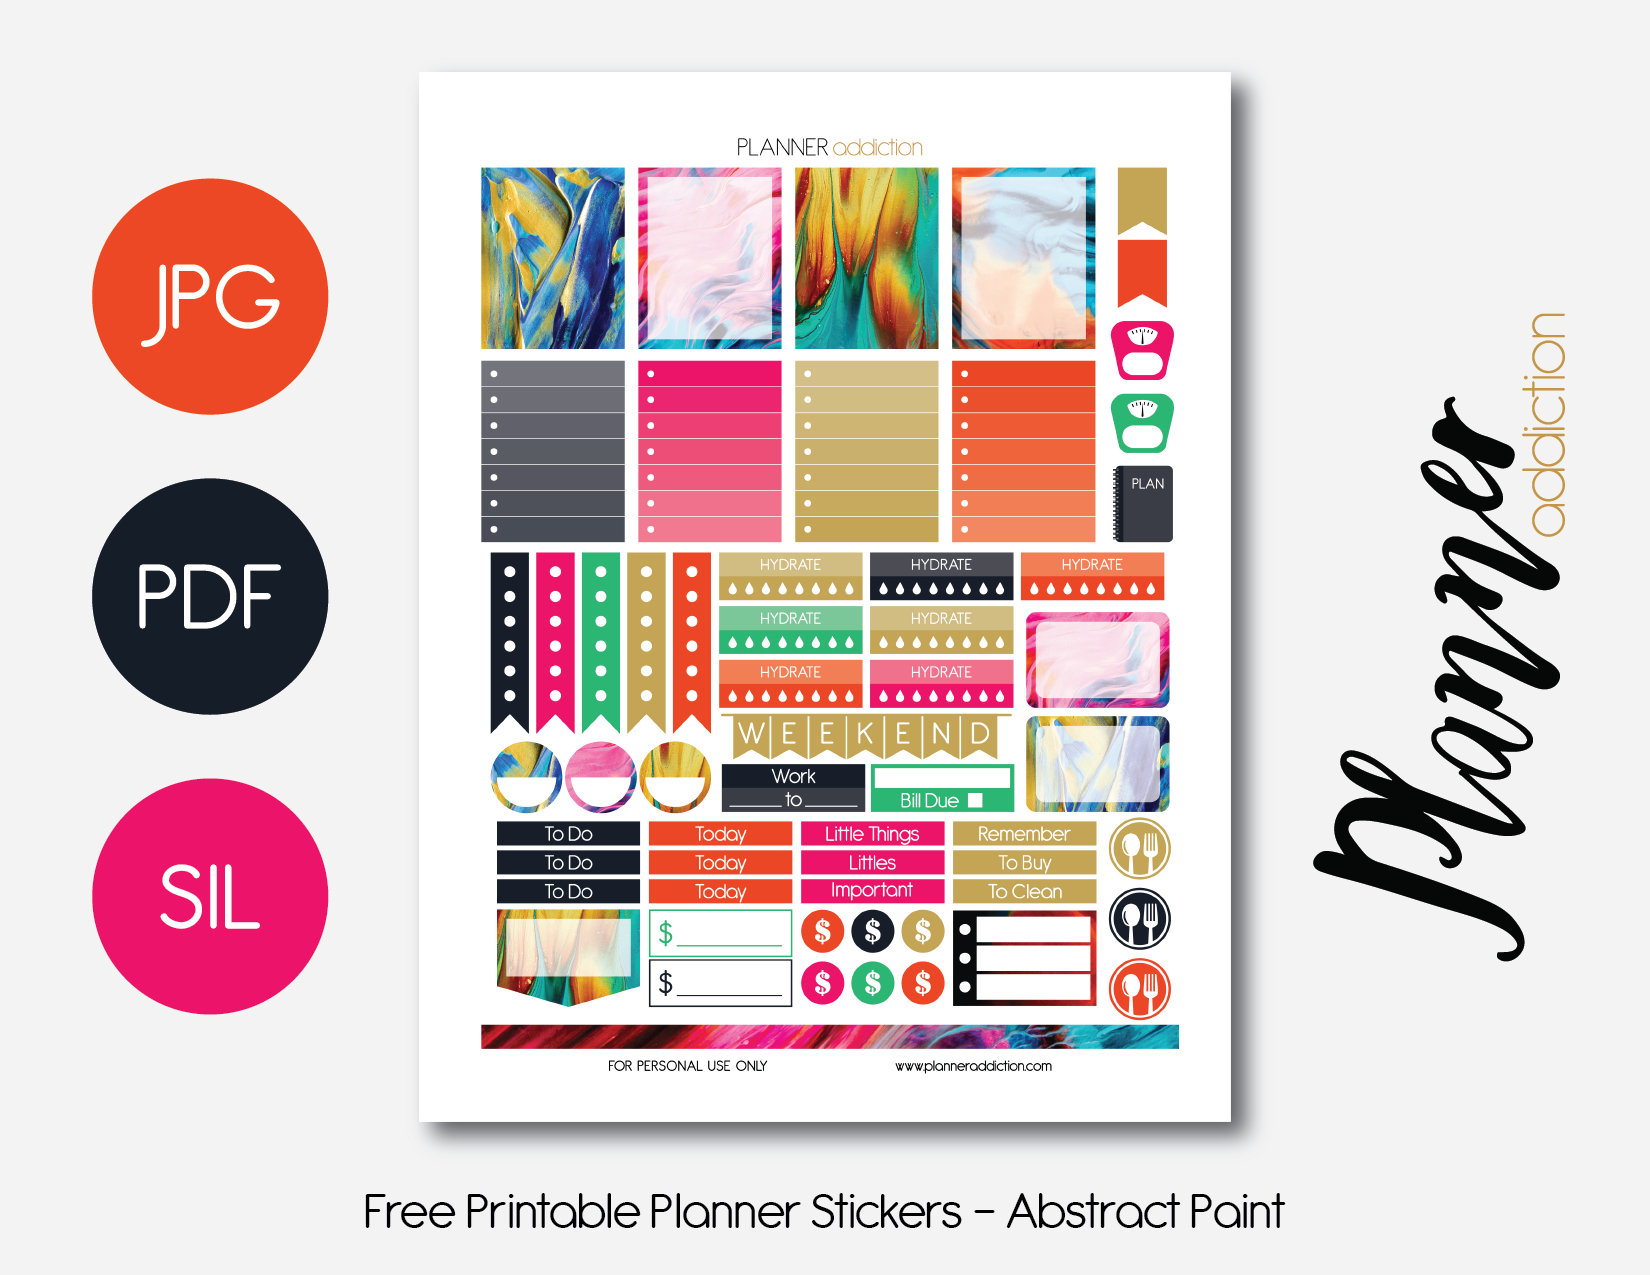 Free Printable Planner Stickers – Planner Addiction - Free Printable Planner Stickers